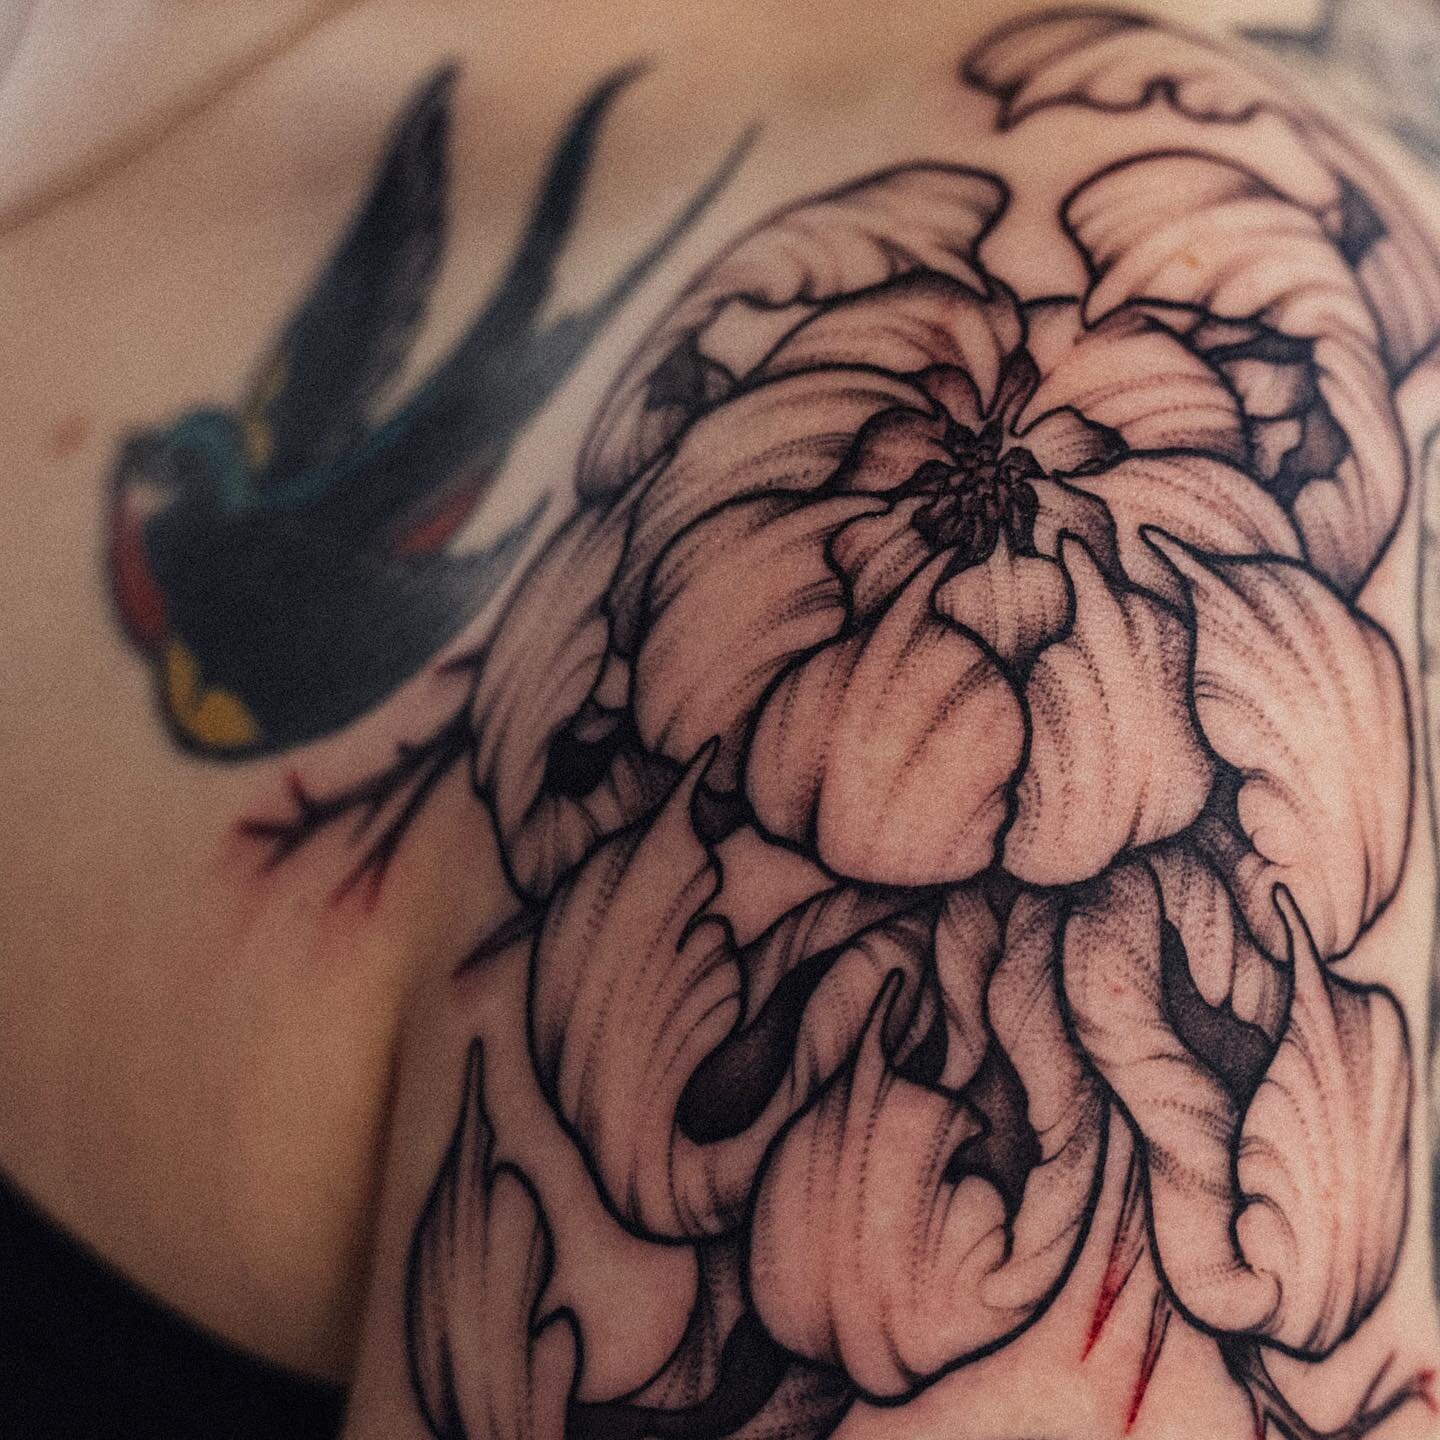 Freehand shoulder chrysanthemum with thorns and subtle red accents. I had so much fun with this

#yyz #toronto #torontotattoo #torontotattooartist #torontolife #artist #photography #art #illustration #freehandtattoo #chrysanthemum #chrysanthemumtatto